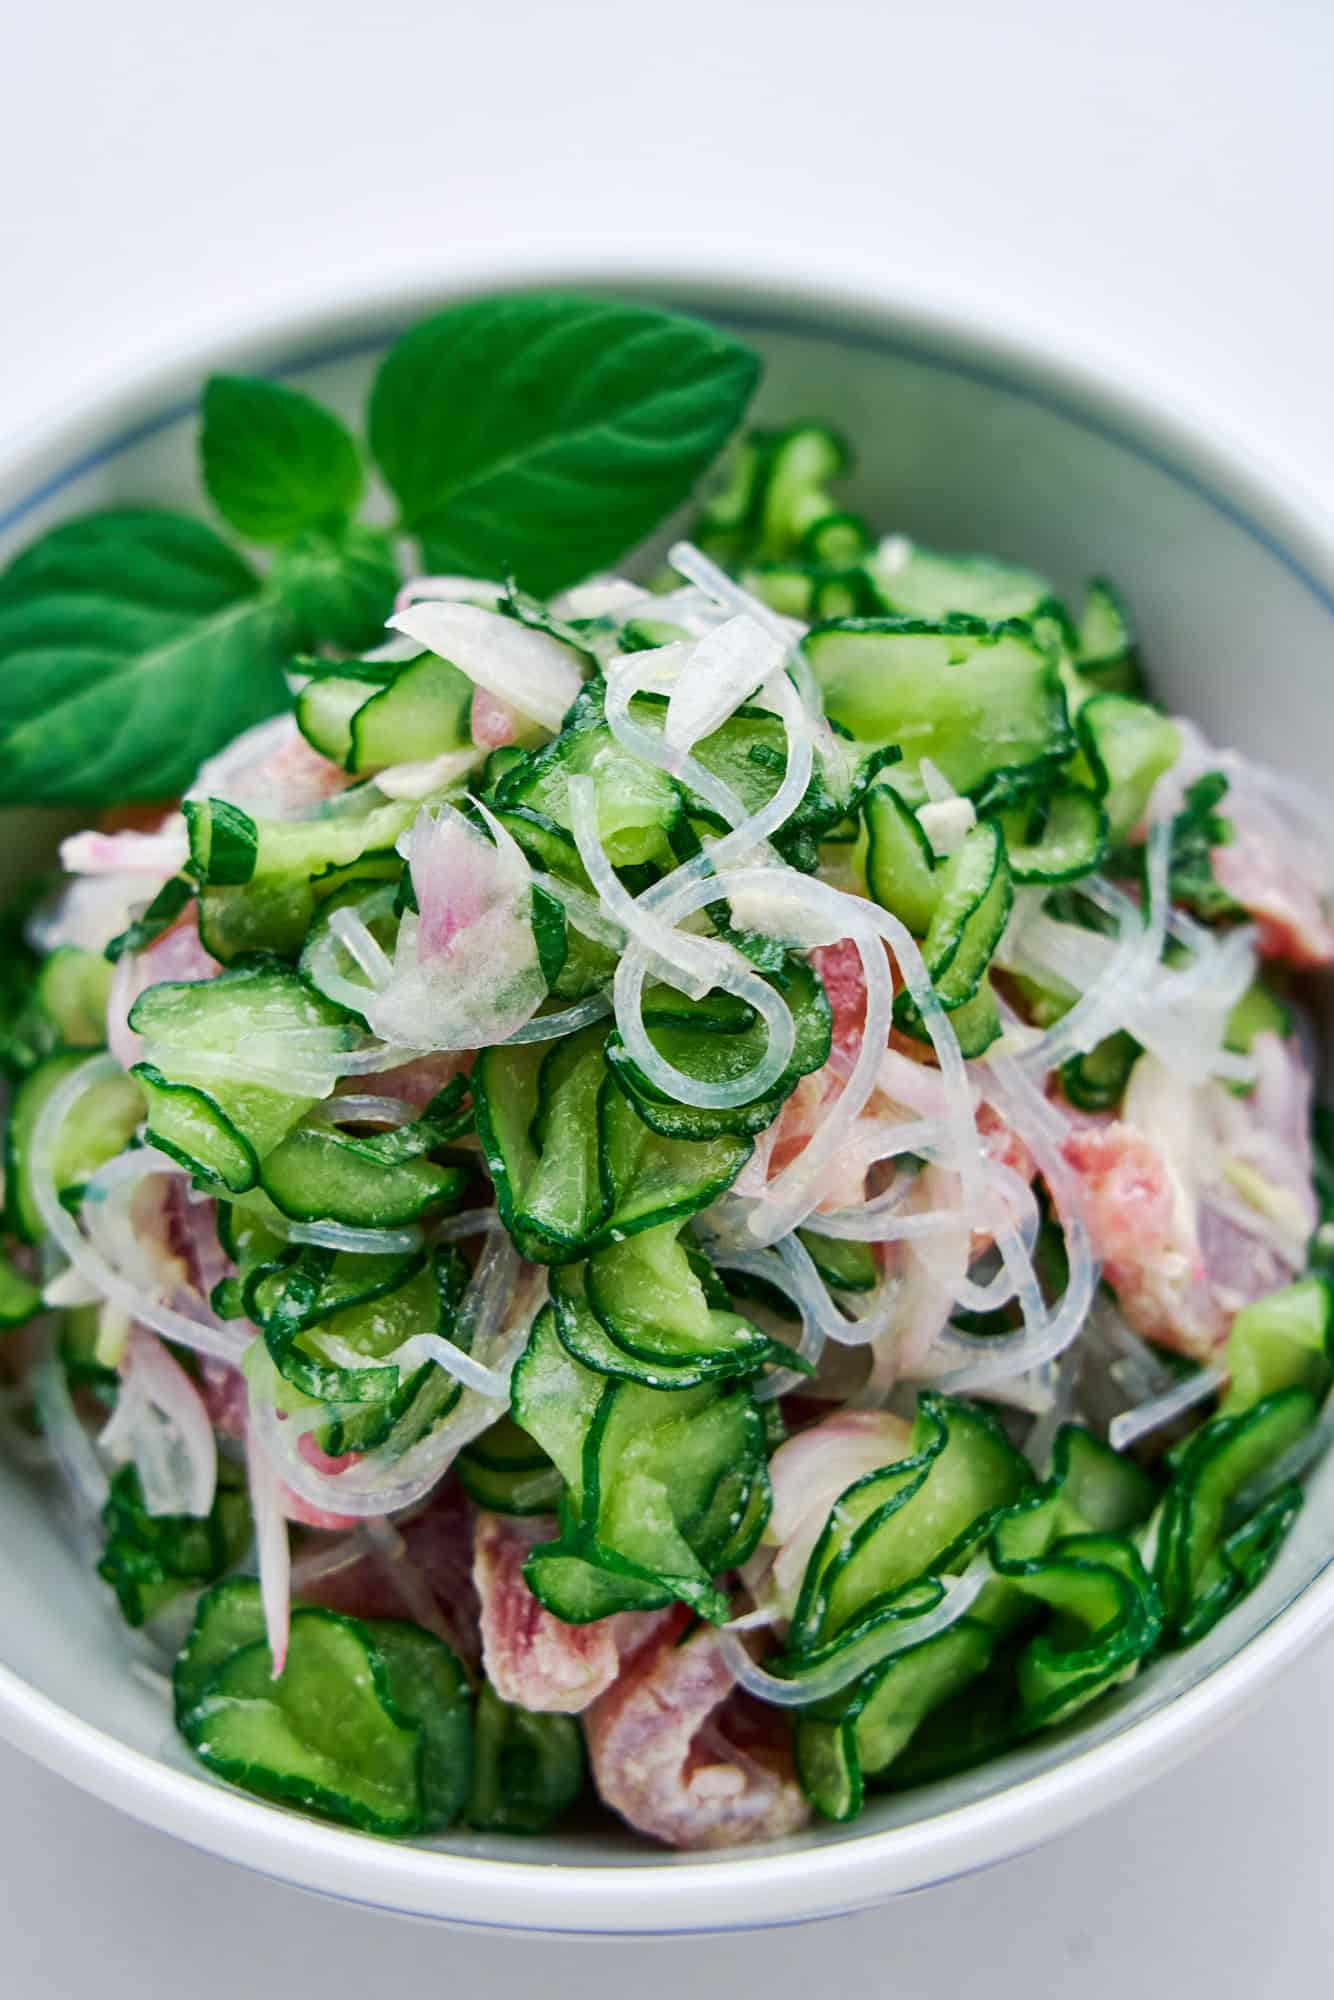 This refreshing glass noodle salad with tuna ceviche and mint is perfect for a hot summer day.